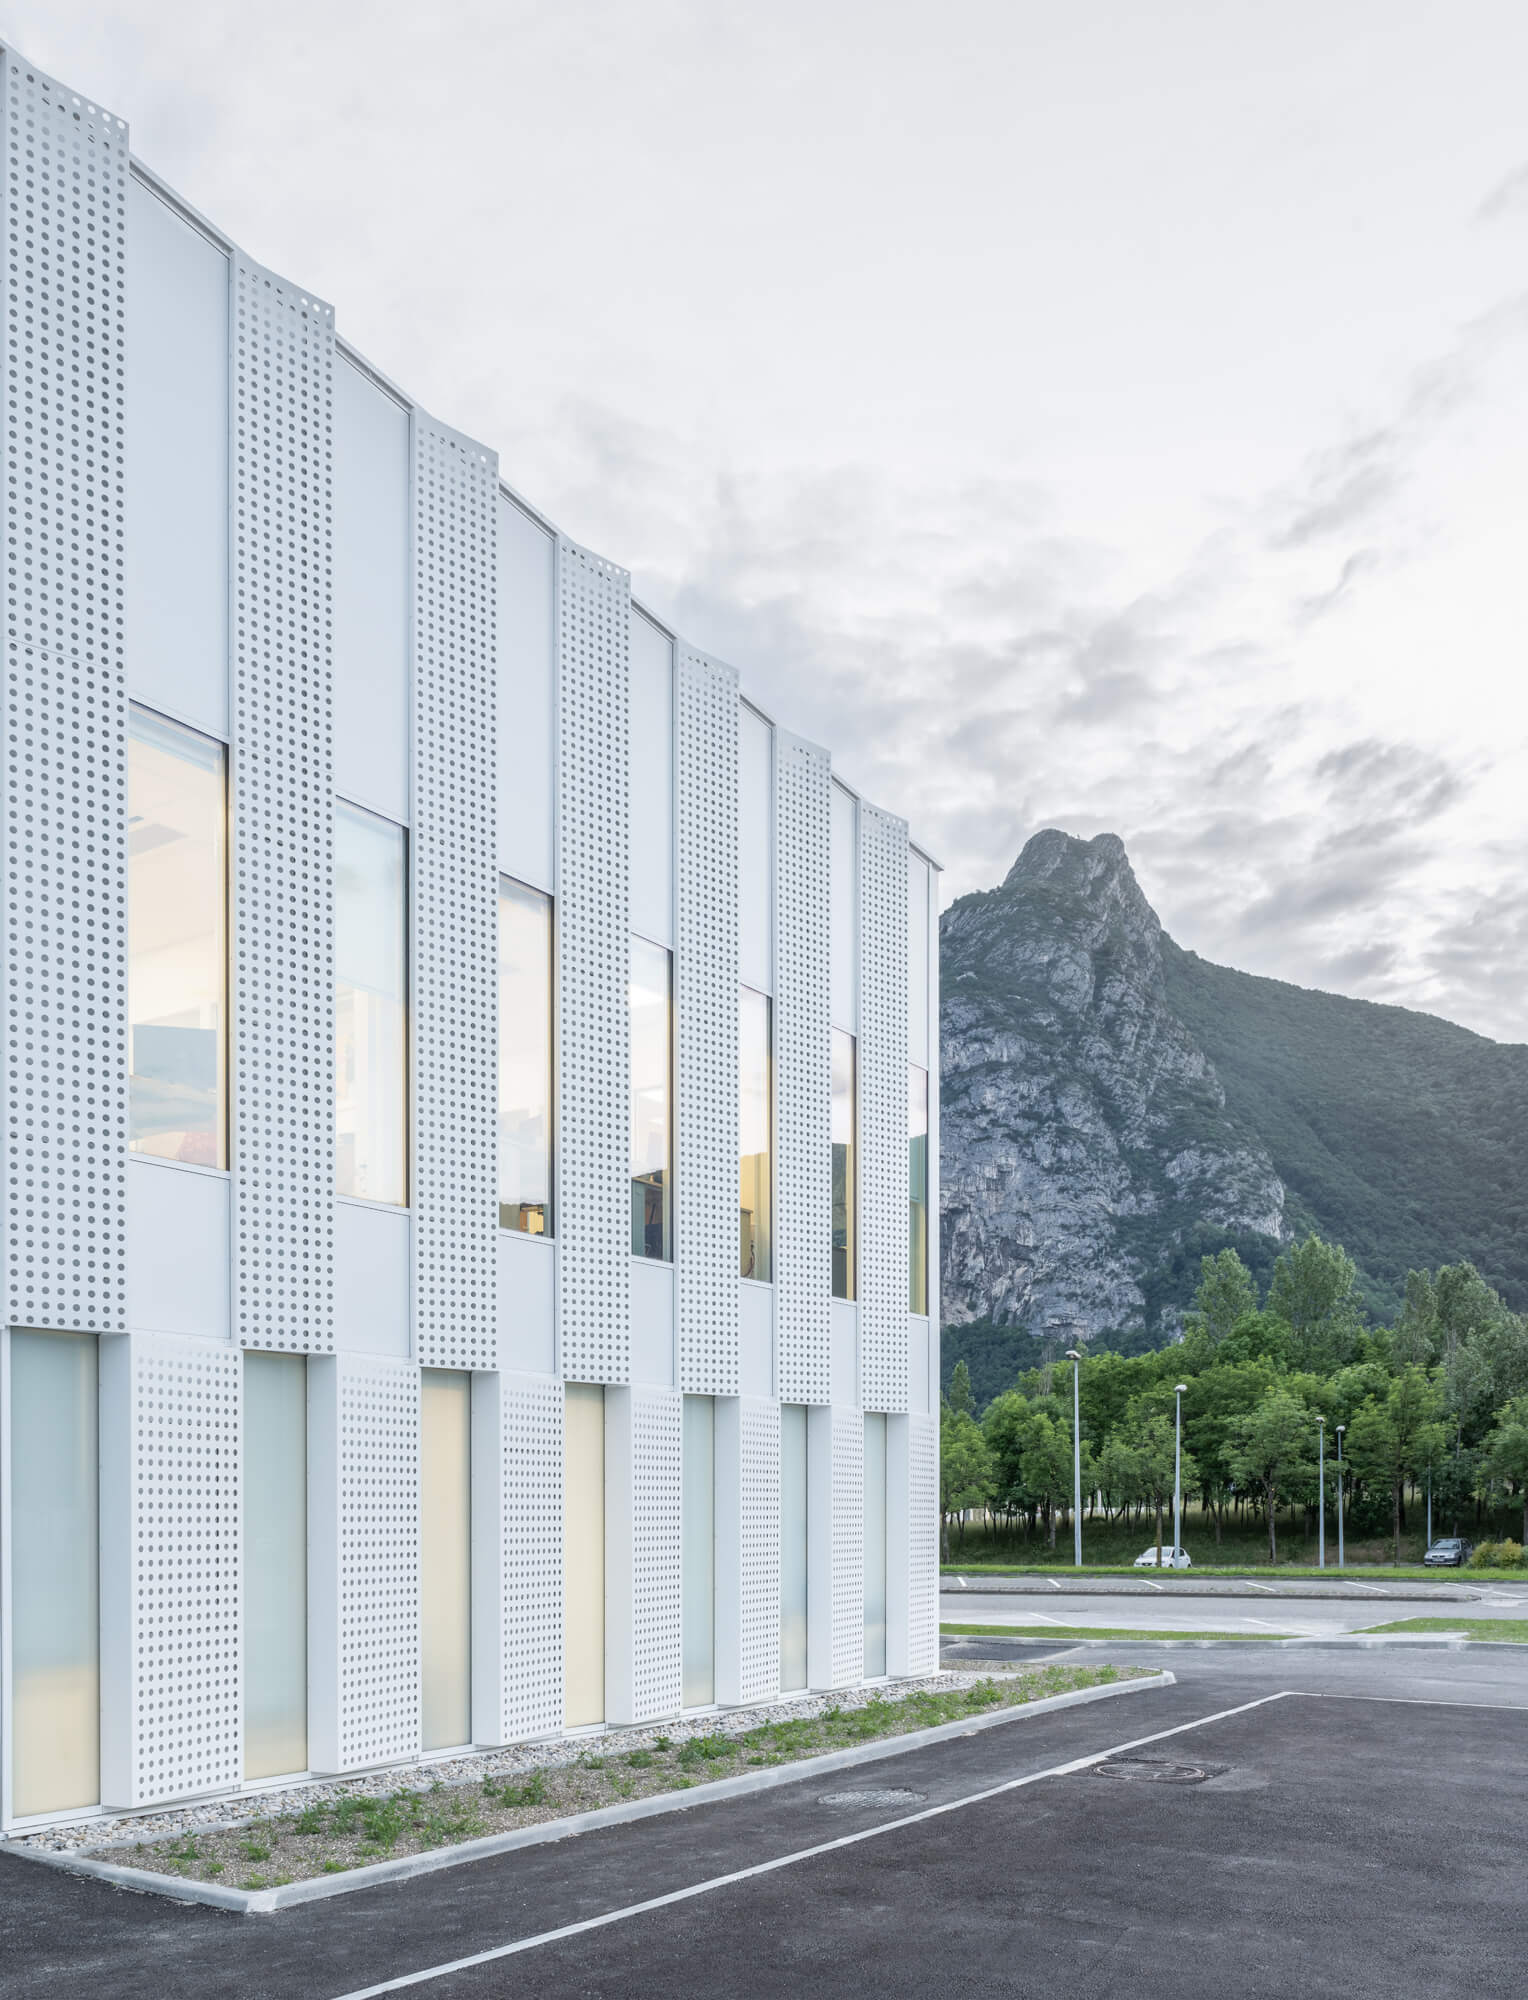 A white building with angular facade patterns with a mountain in the background